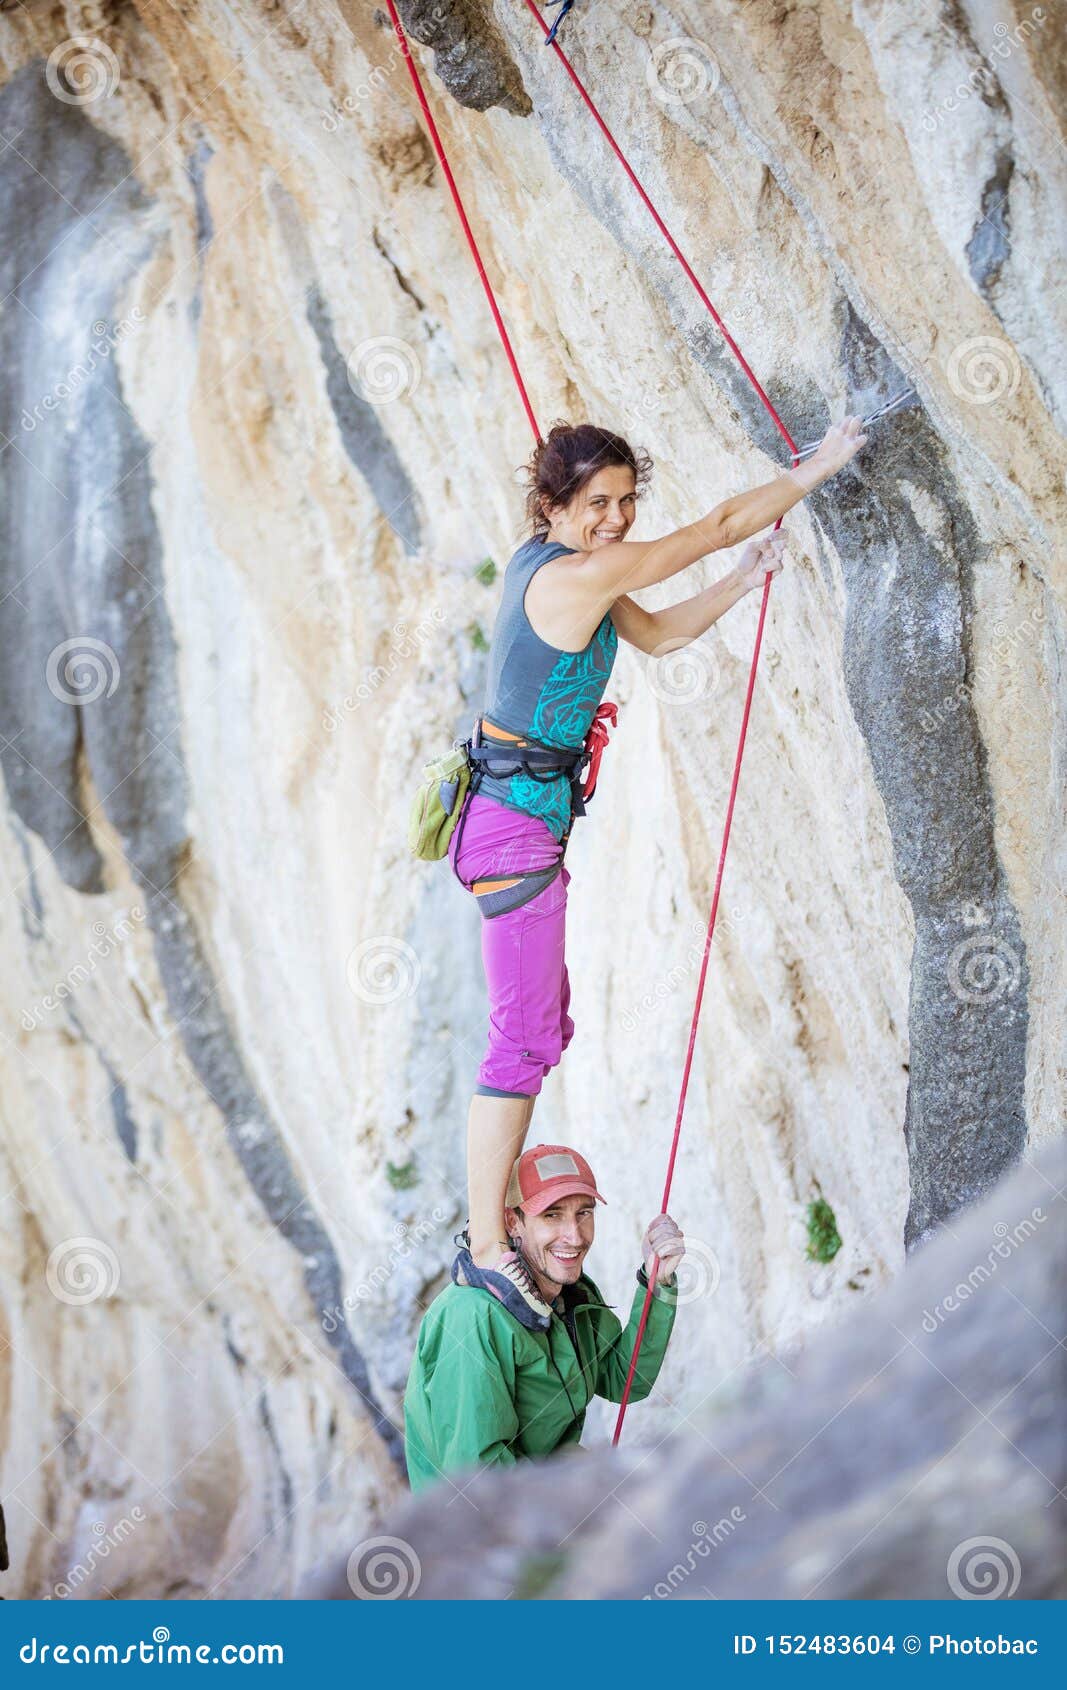 female rock climber standing on shoulders of her partner in order to start climbing challenging route